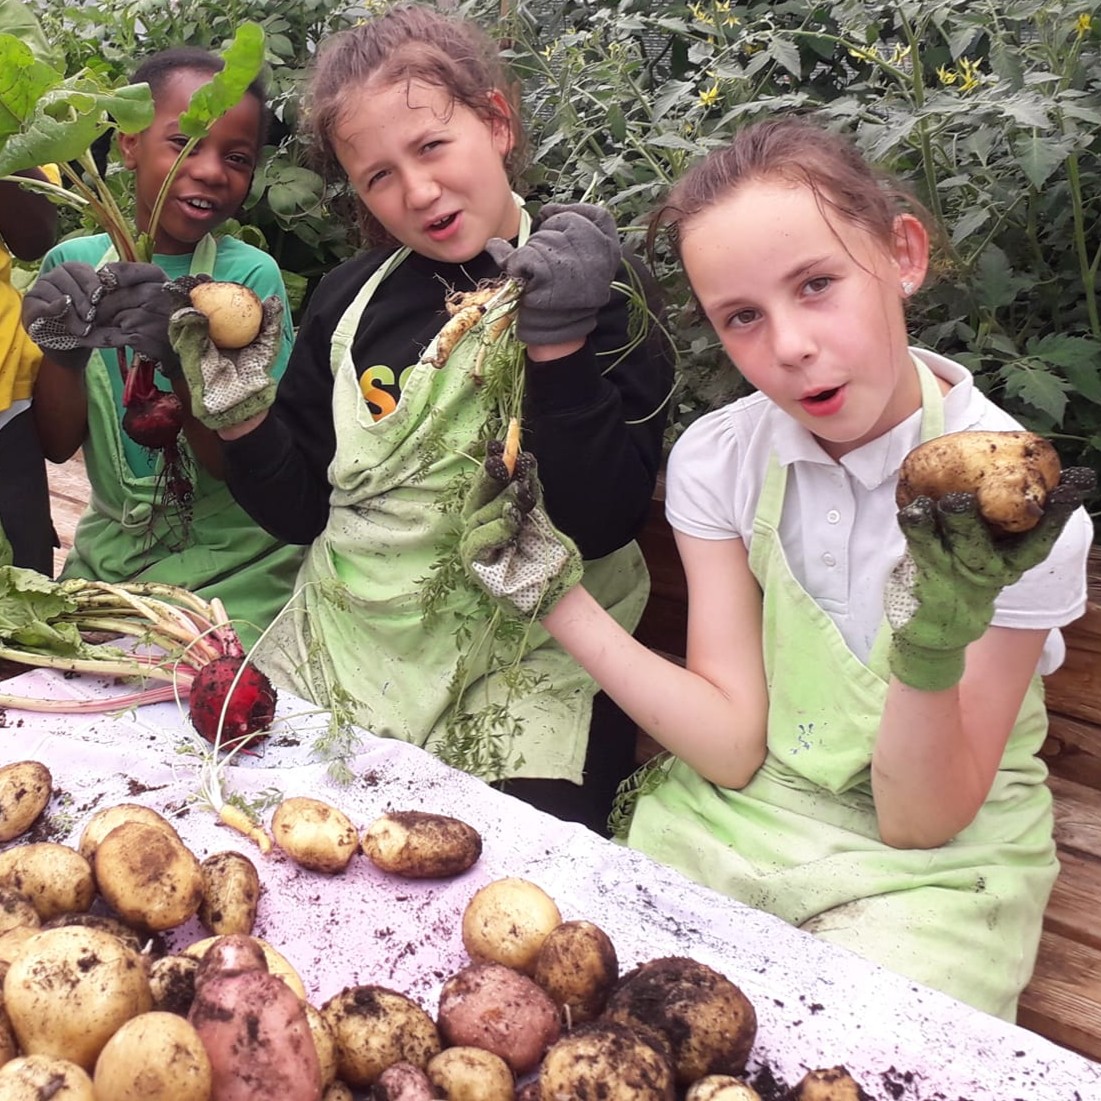 For @EdibleSE16, a community food growing, gardening and arts charity based in Southwark, London, their 2023 highlight was working in the gardening club at @SurreySqSchool with pupils of all ages. They grew potatoes and other vegetables to share with the local families at @OKRFZ.